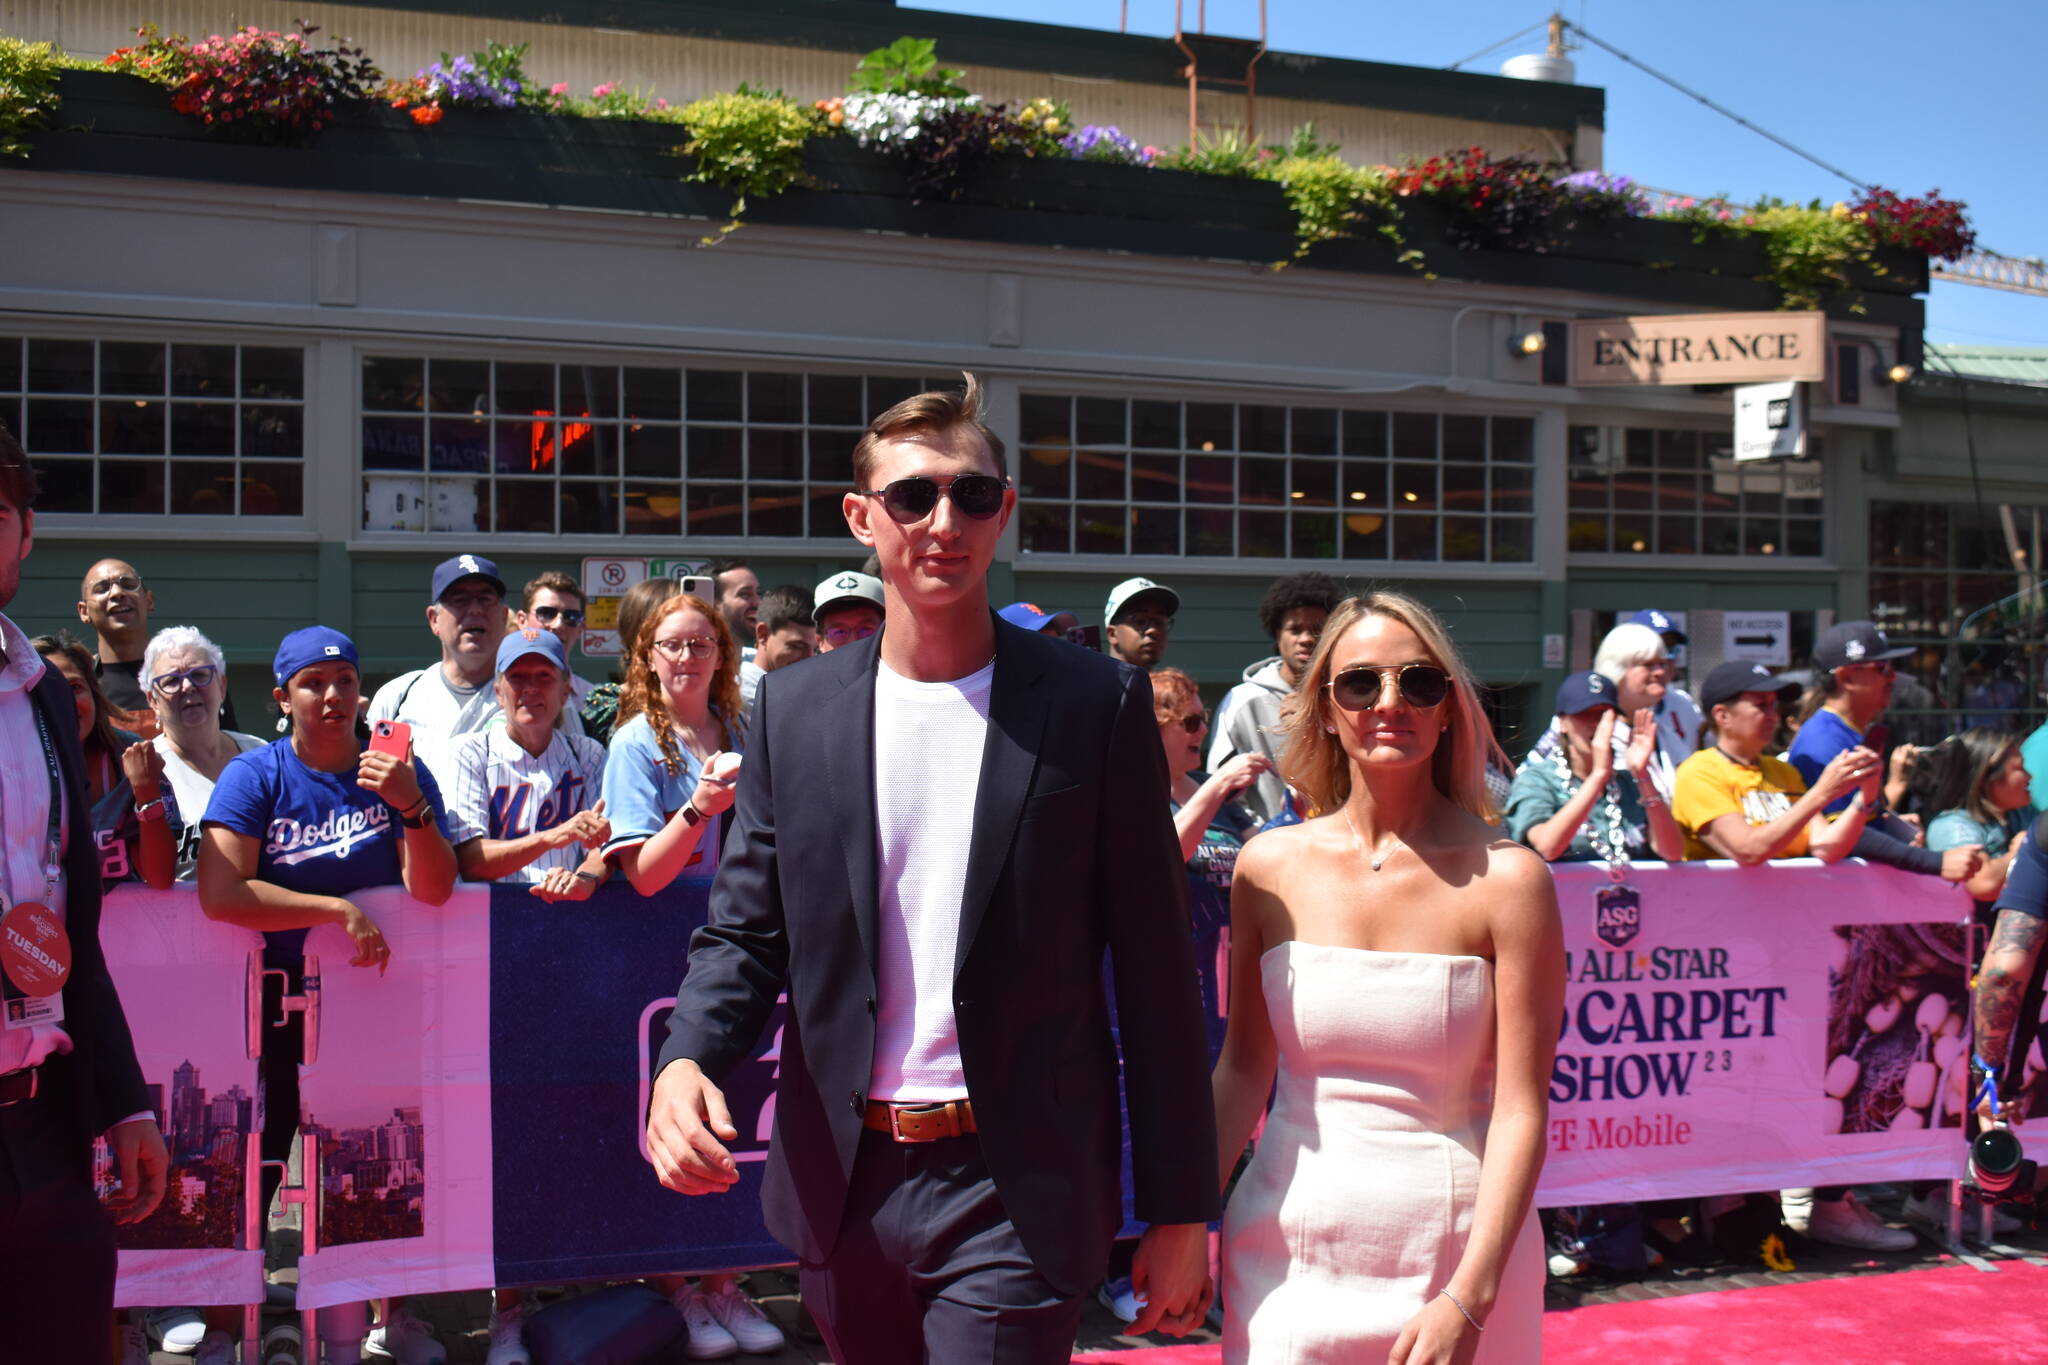 Mariners SP and first time All-Star GeorgeKirby on the red carpet at Pike Place Market. Ben Ray / The Mirror